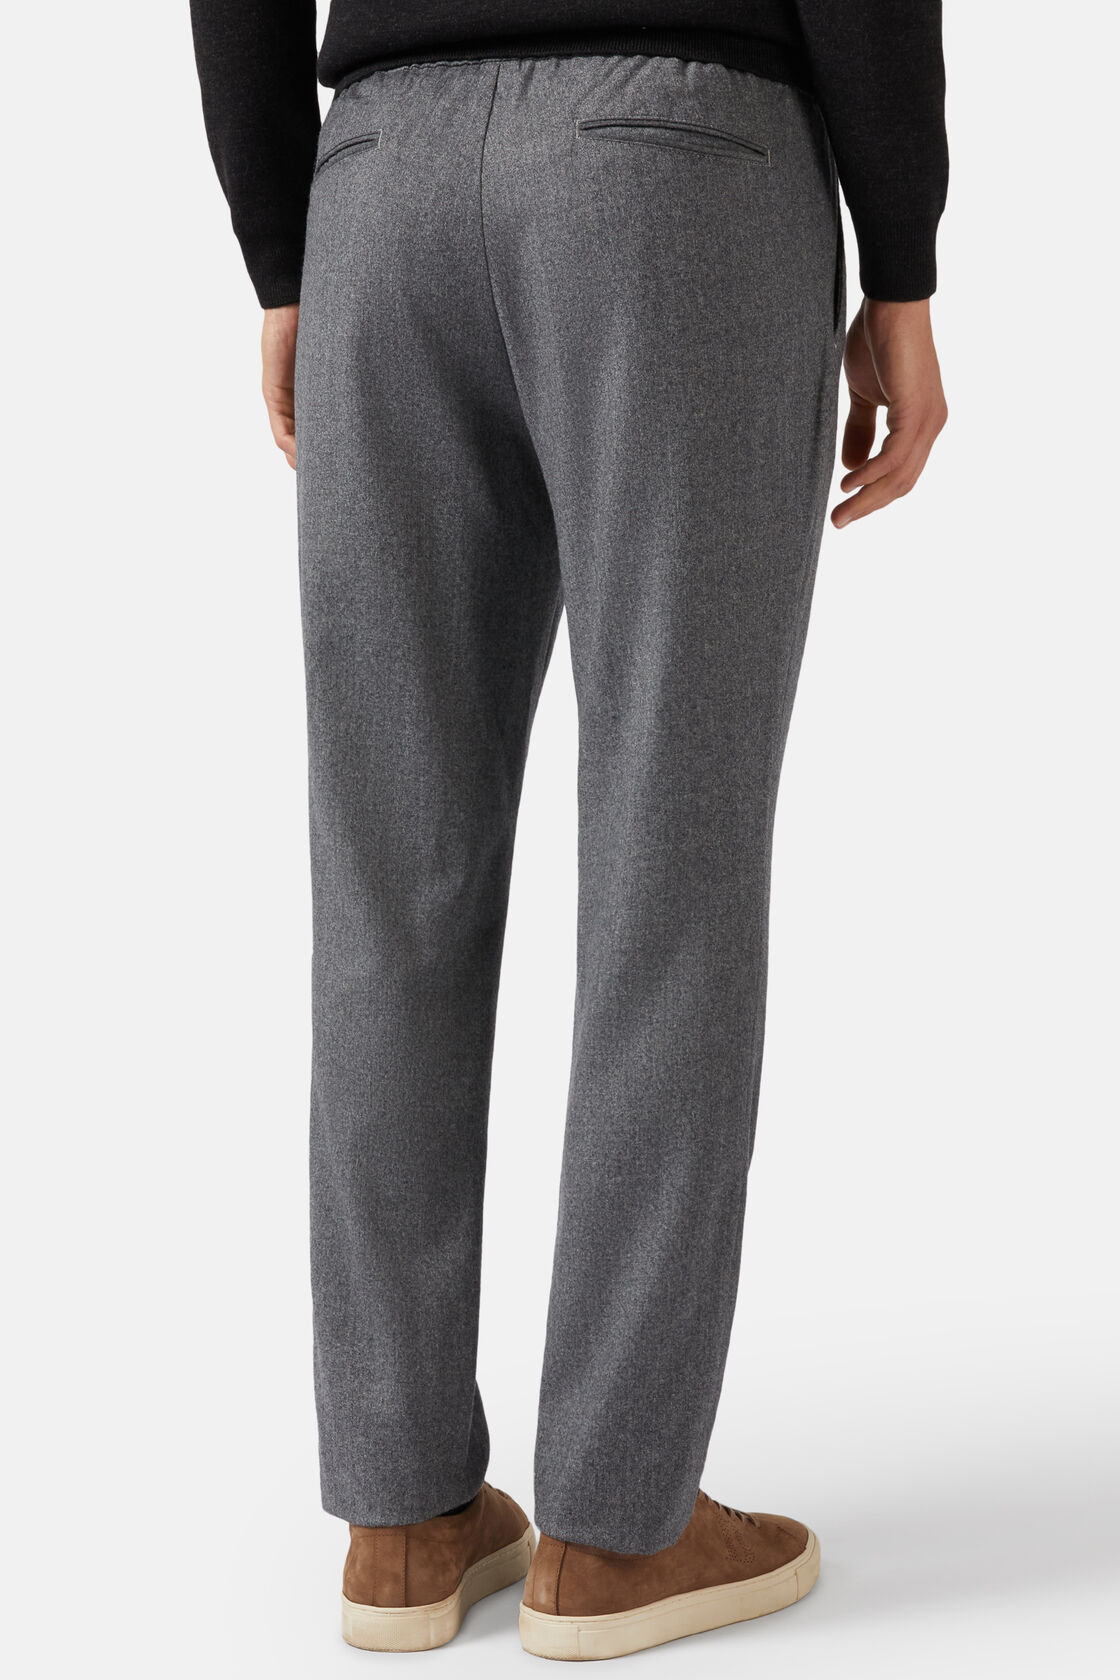 City Trousers in Flannel, Grey, hi-res